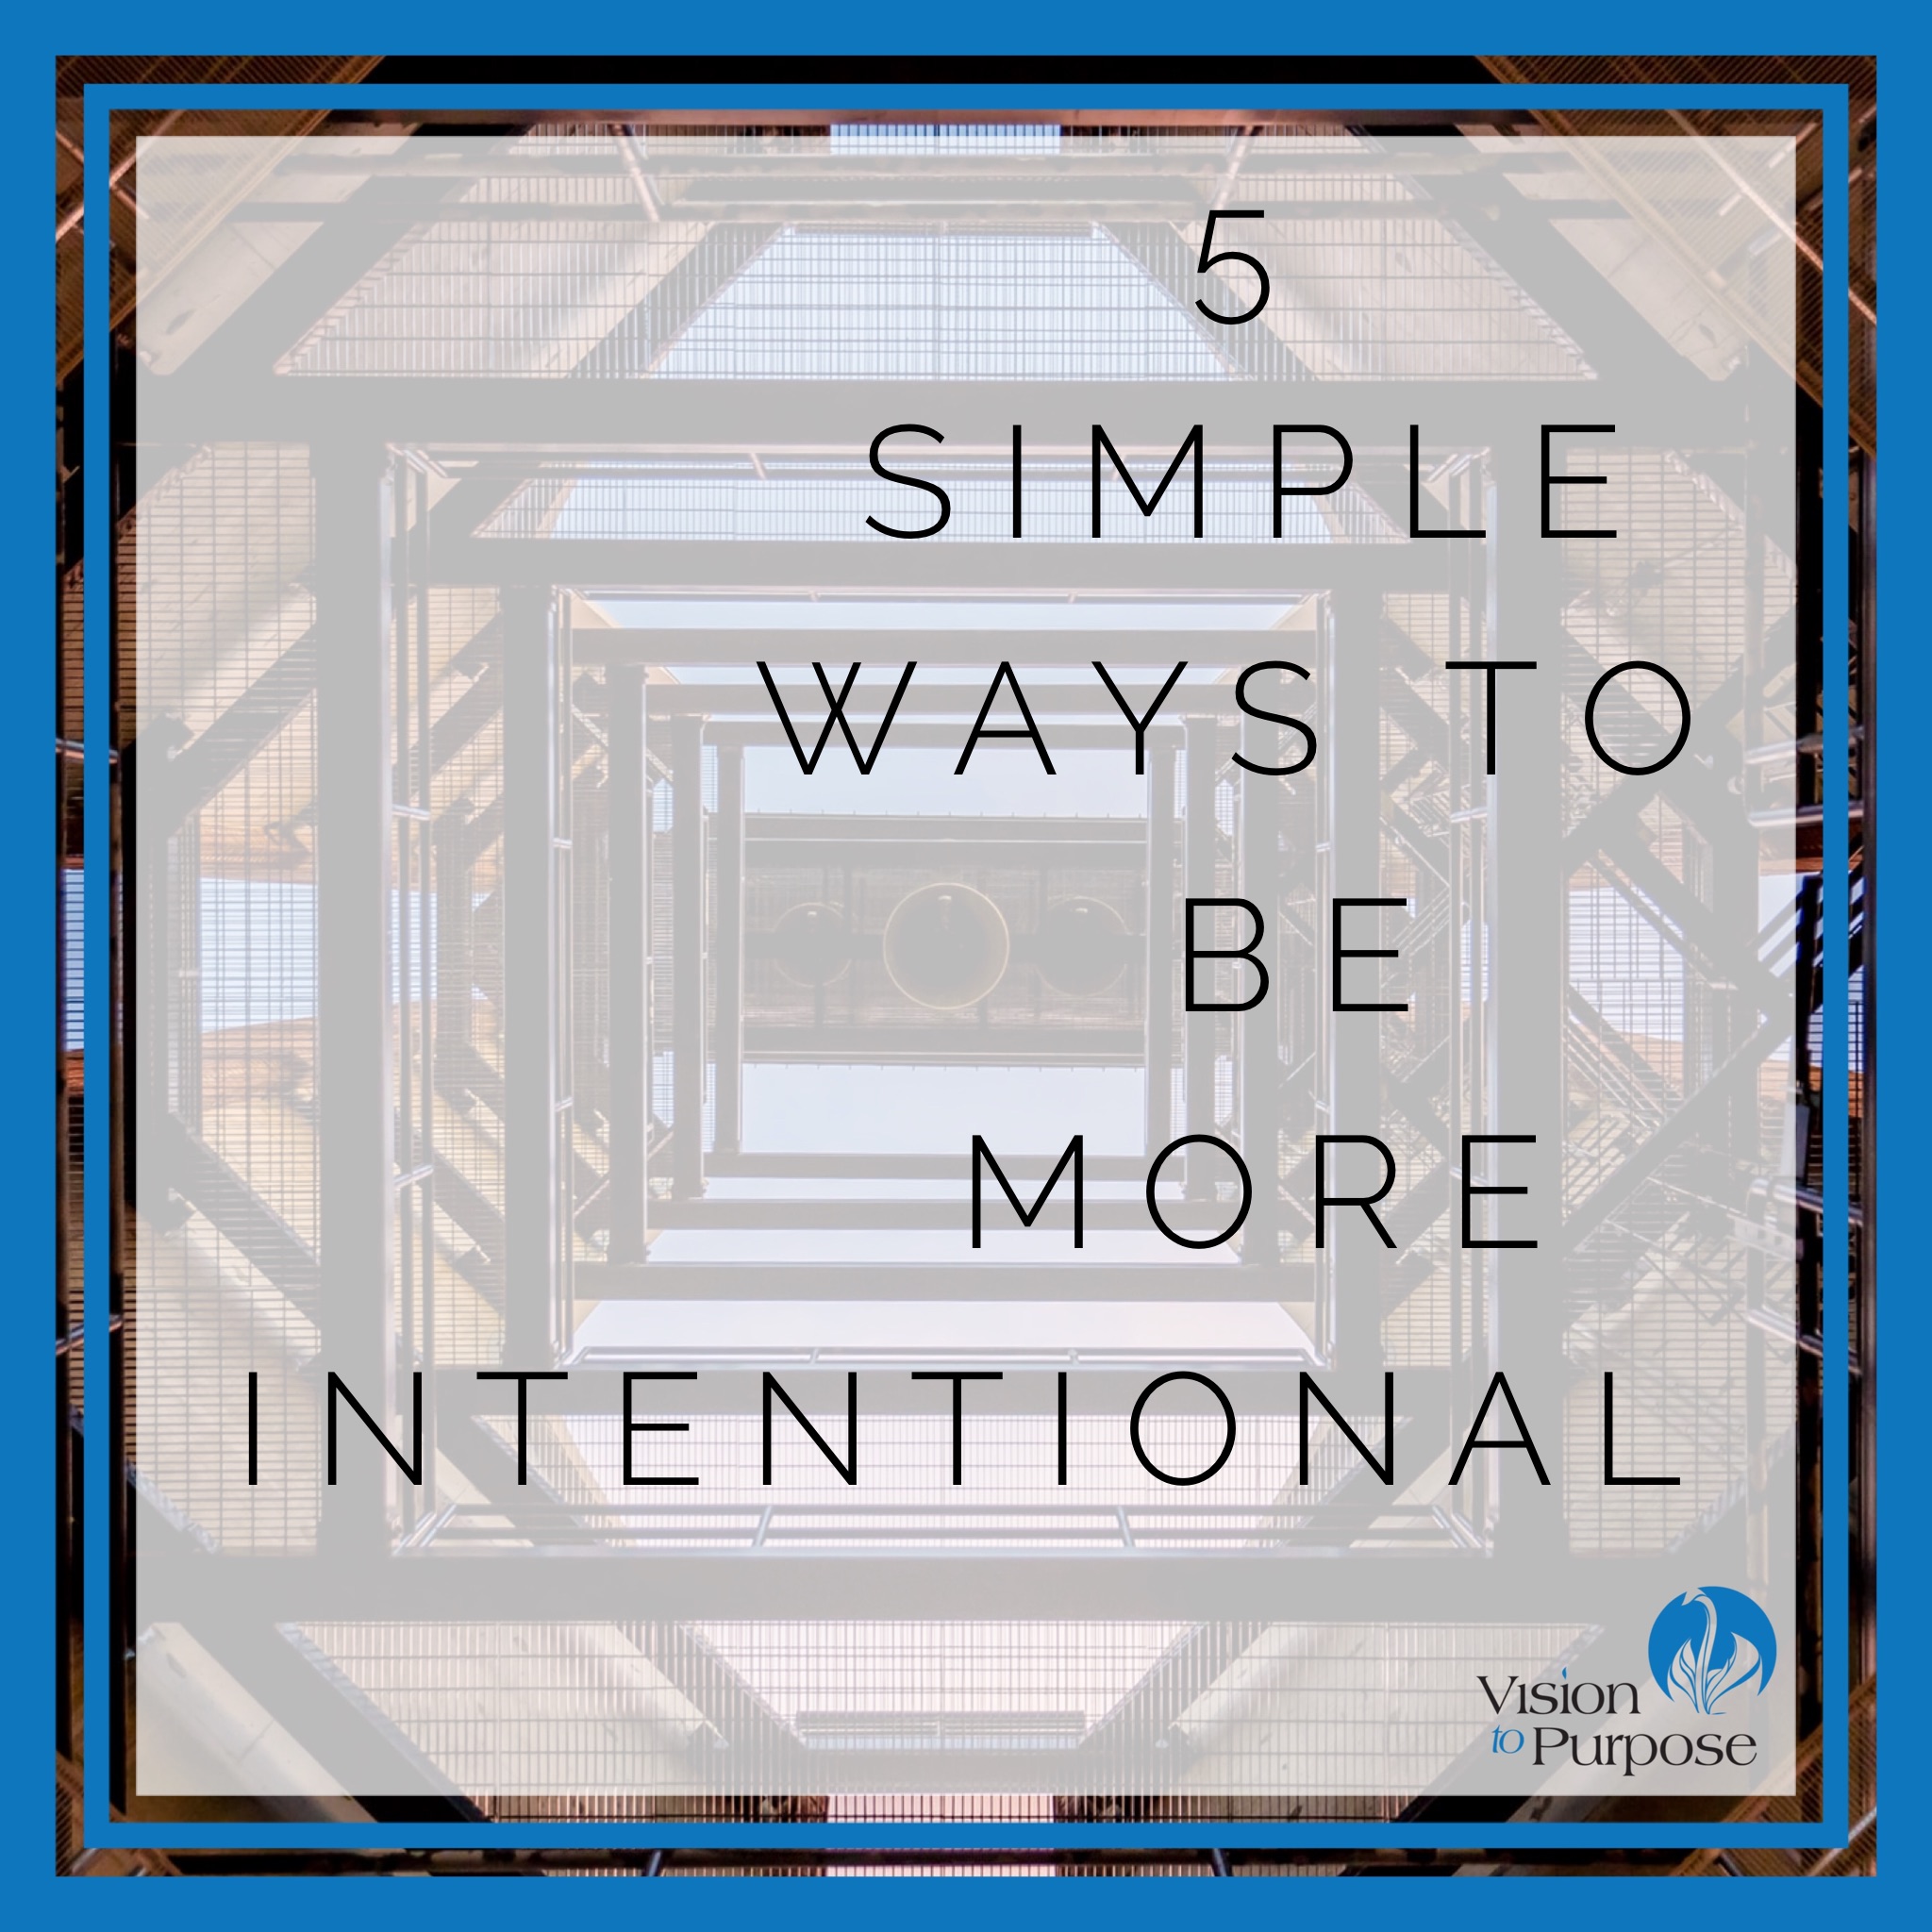 5 simple ways to be more intentional